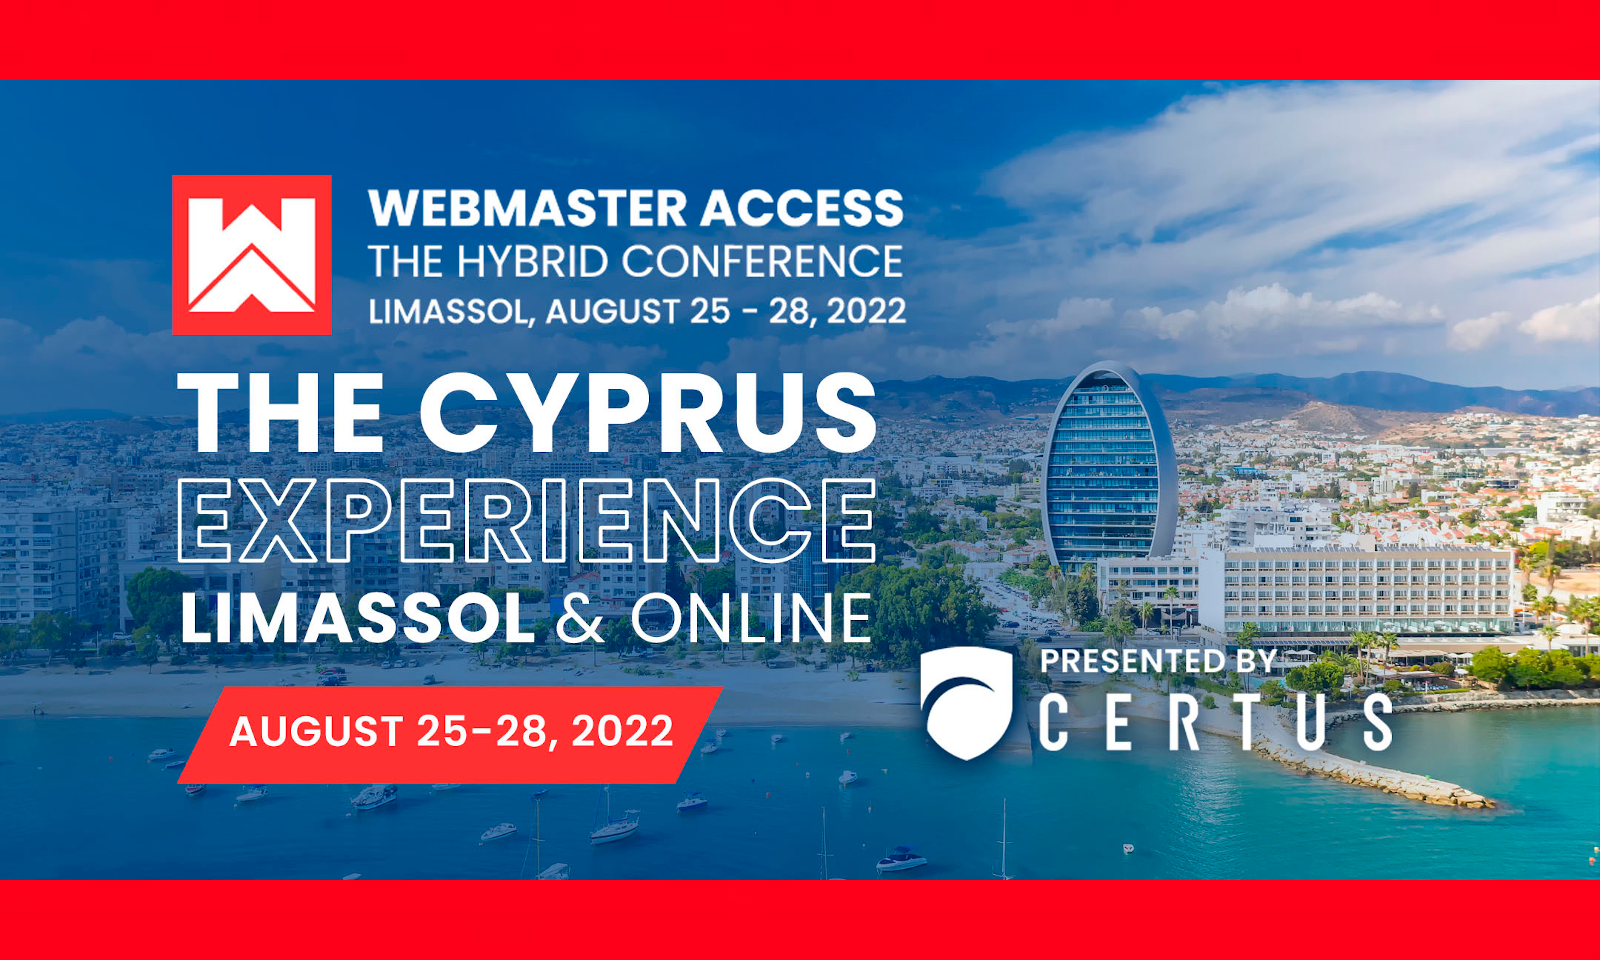 Webmaster Access Coming to Limassol in August